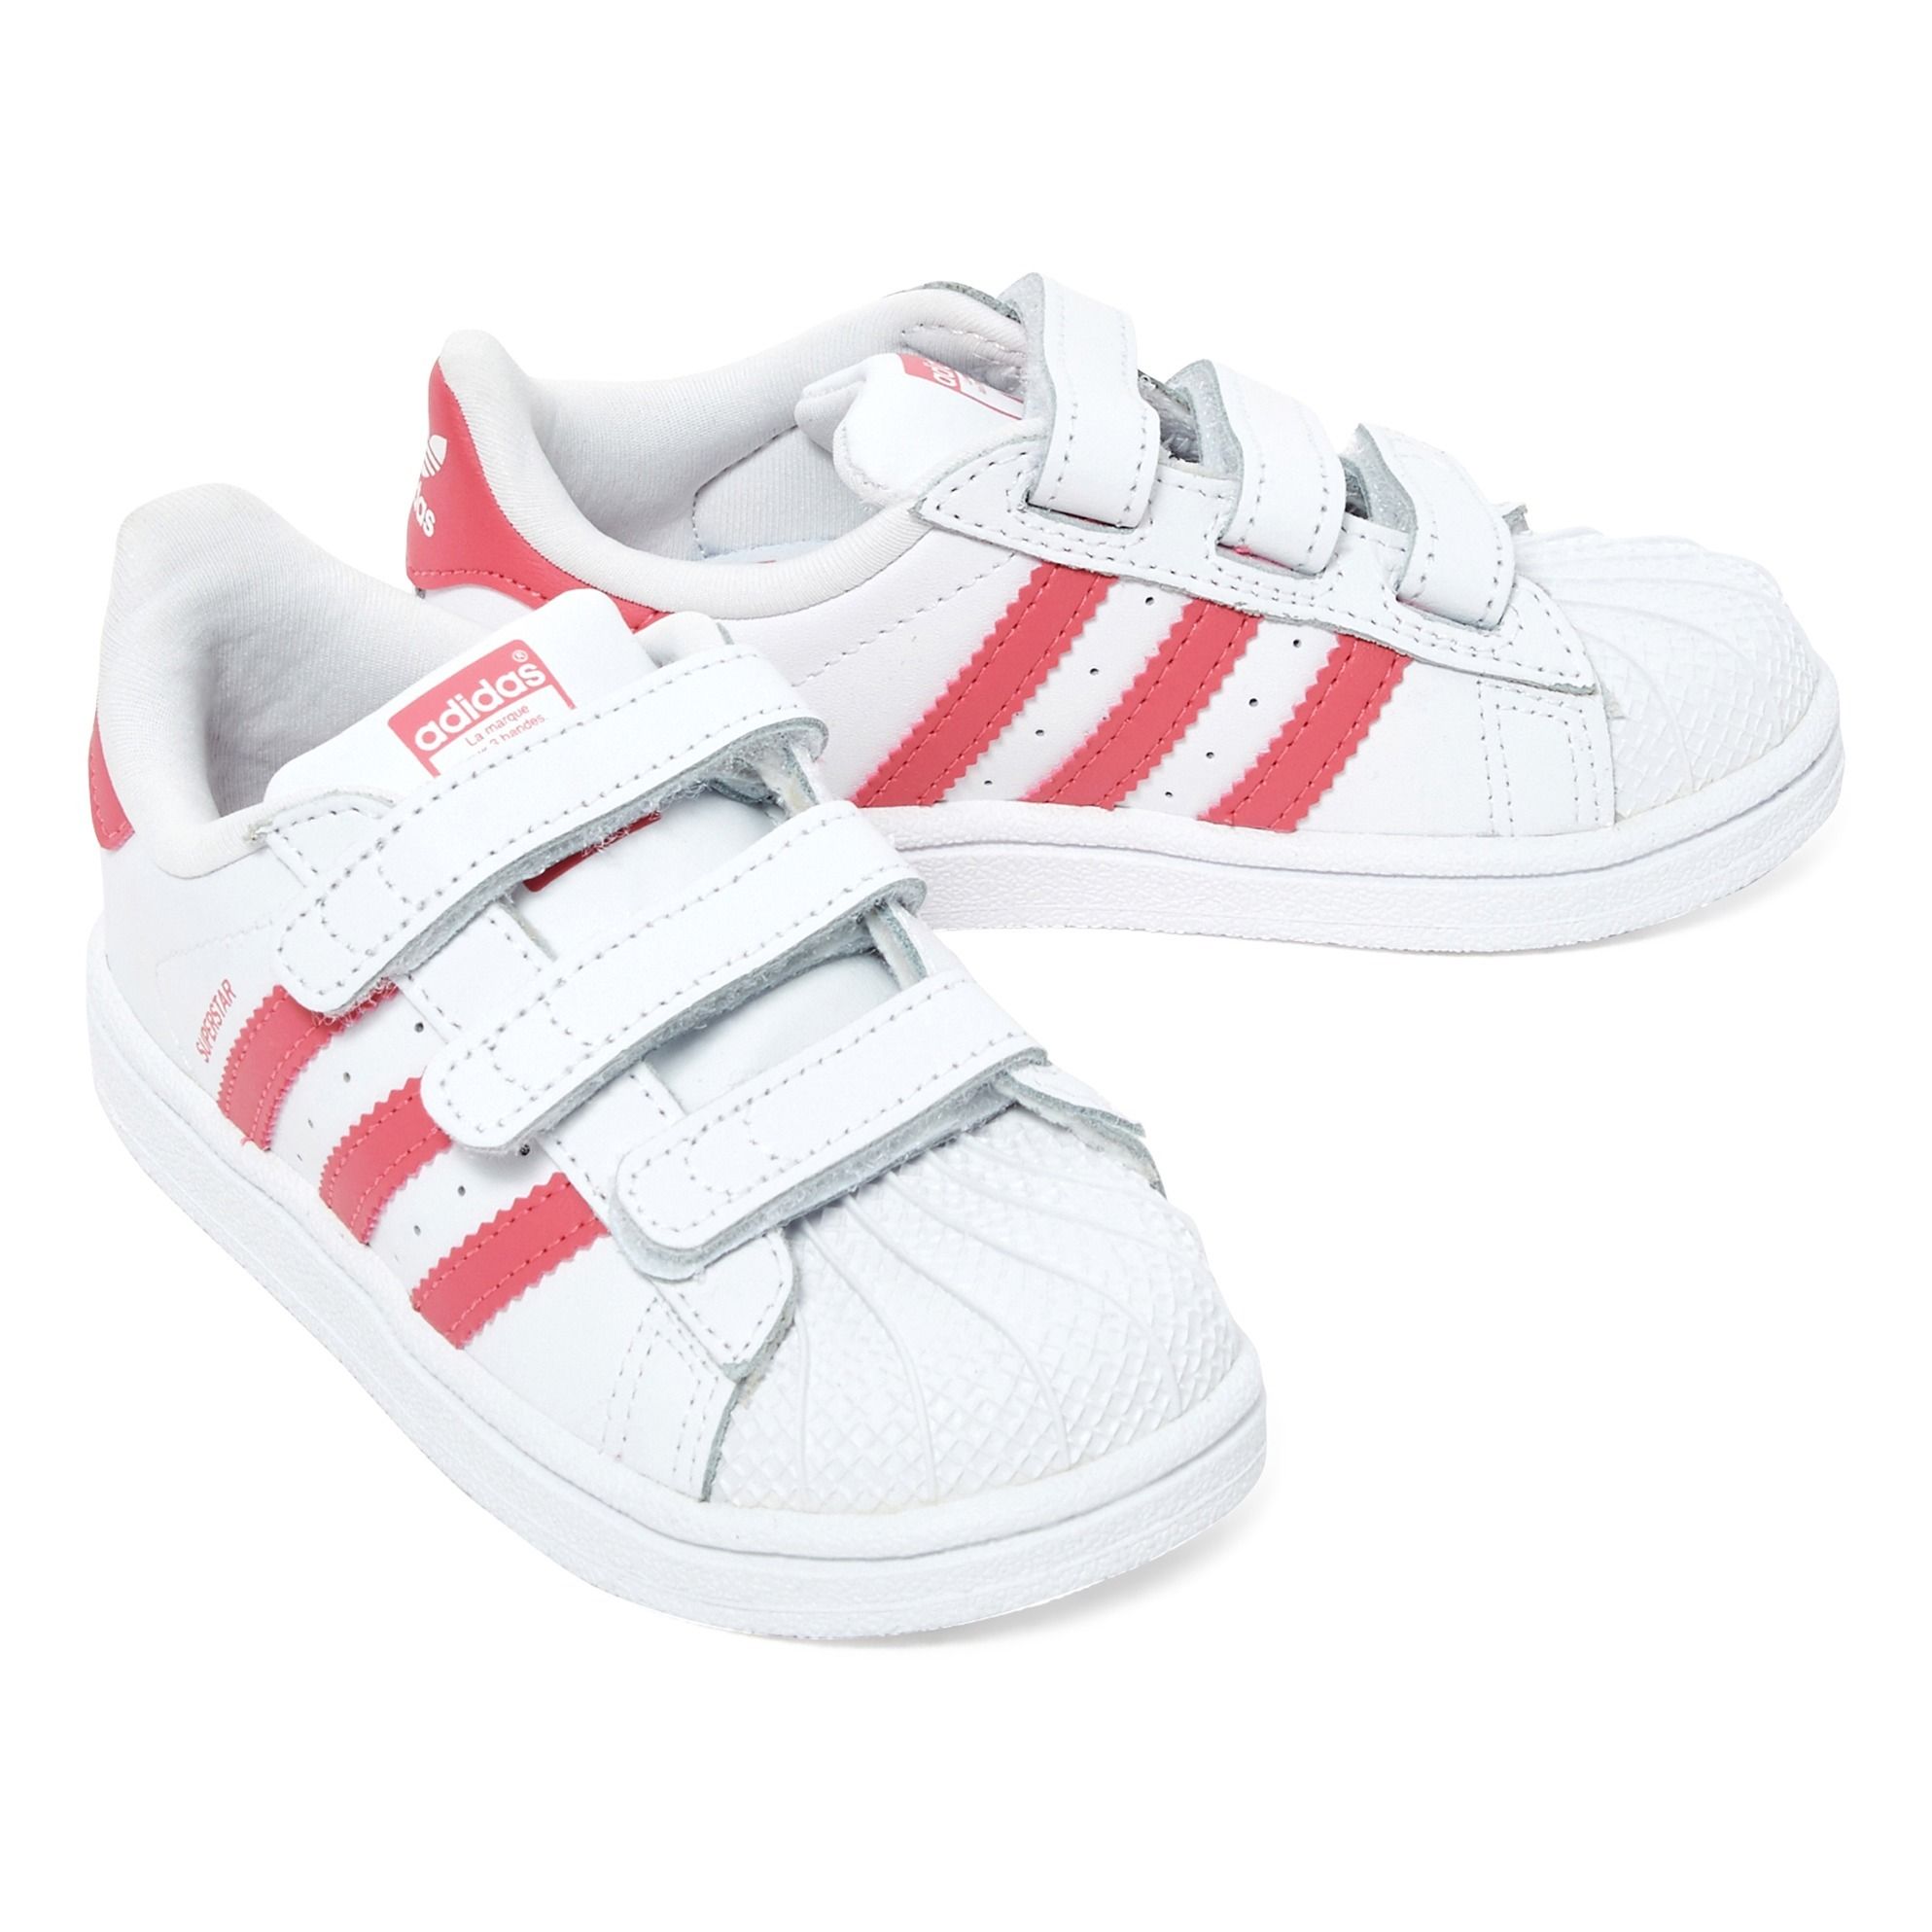 Superstar Velcro Trainers Pink Adidas Shoes Baby , Children